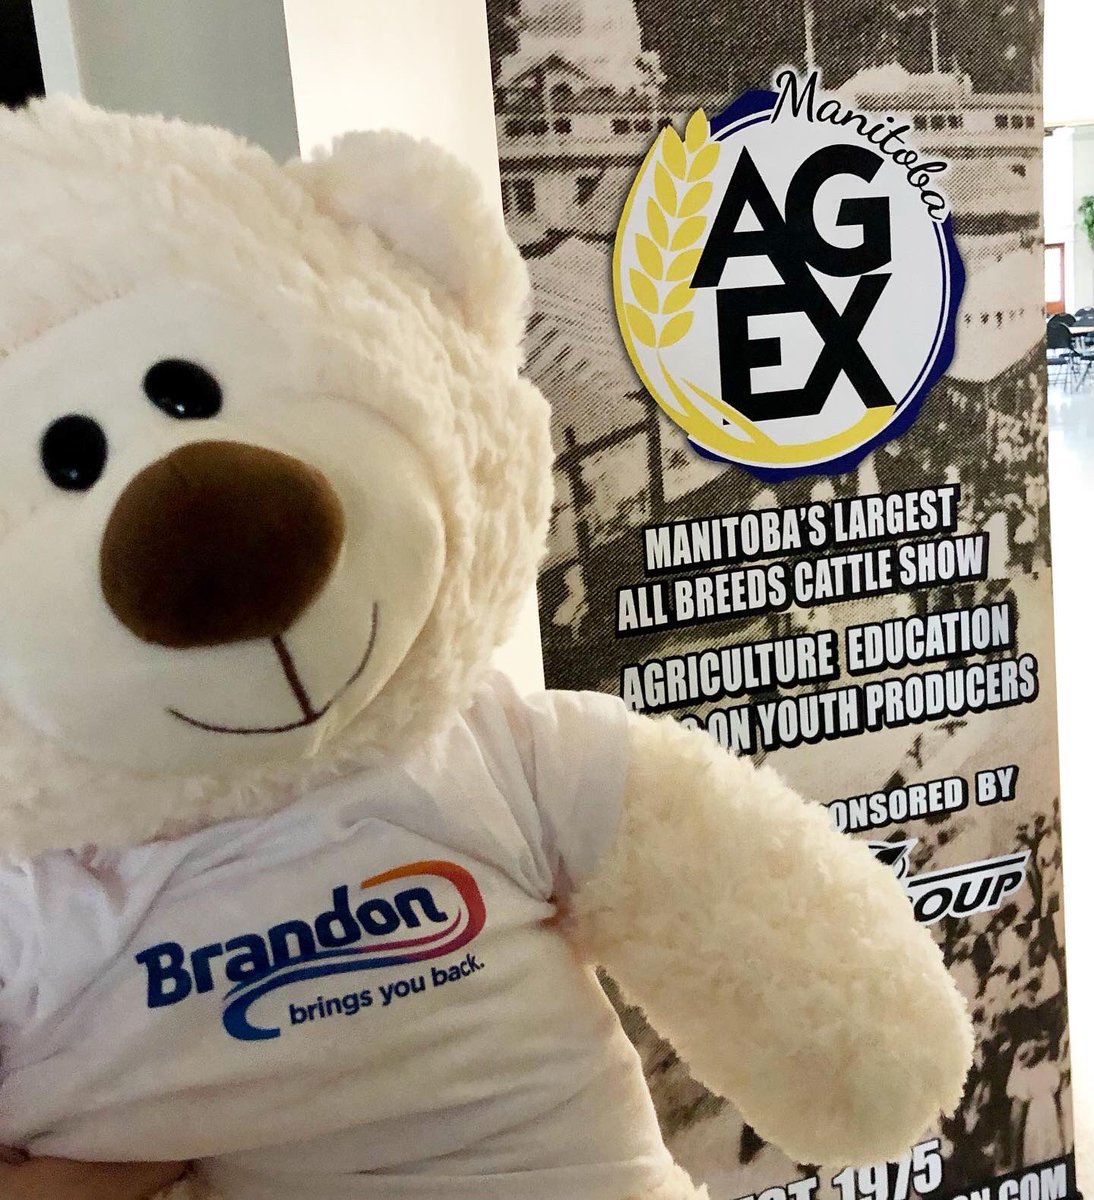 I’m so excited events are back in Brandon! Ag Ex is on until Saturday at the @Keystone_Centre! @ProvincialEx #brandonbringsyouback #eventsbdn #agevents